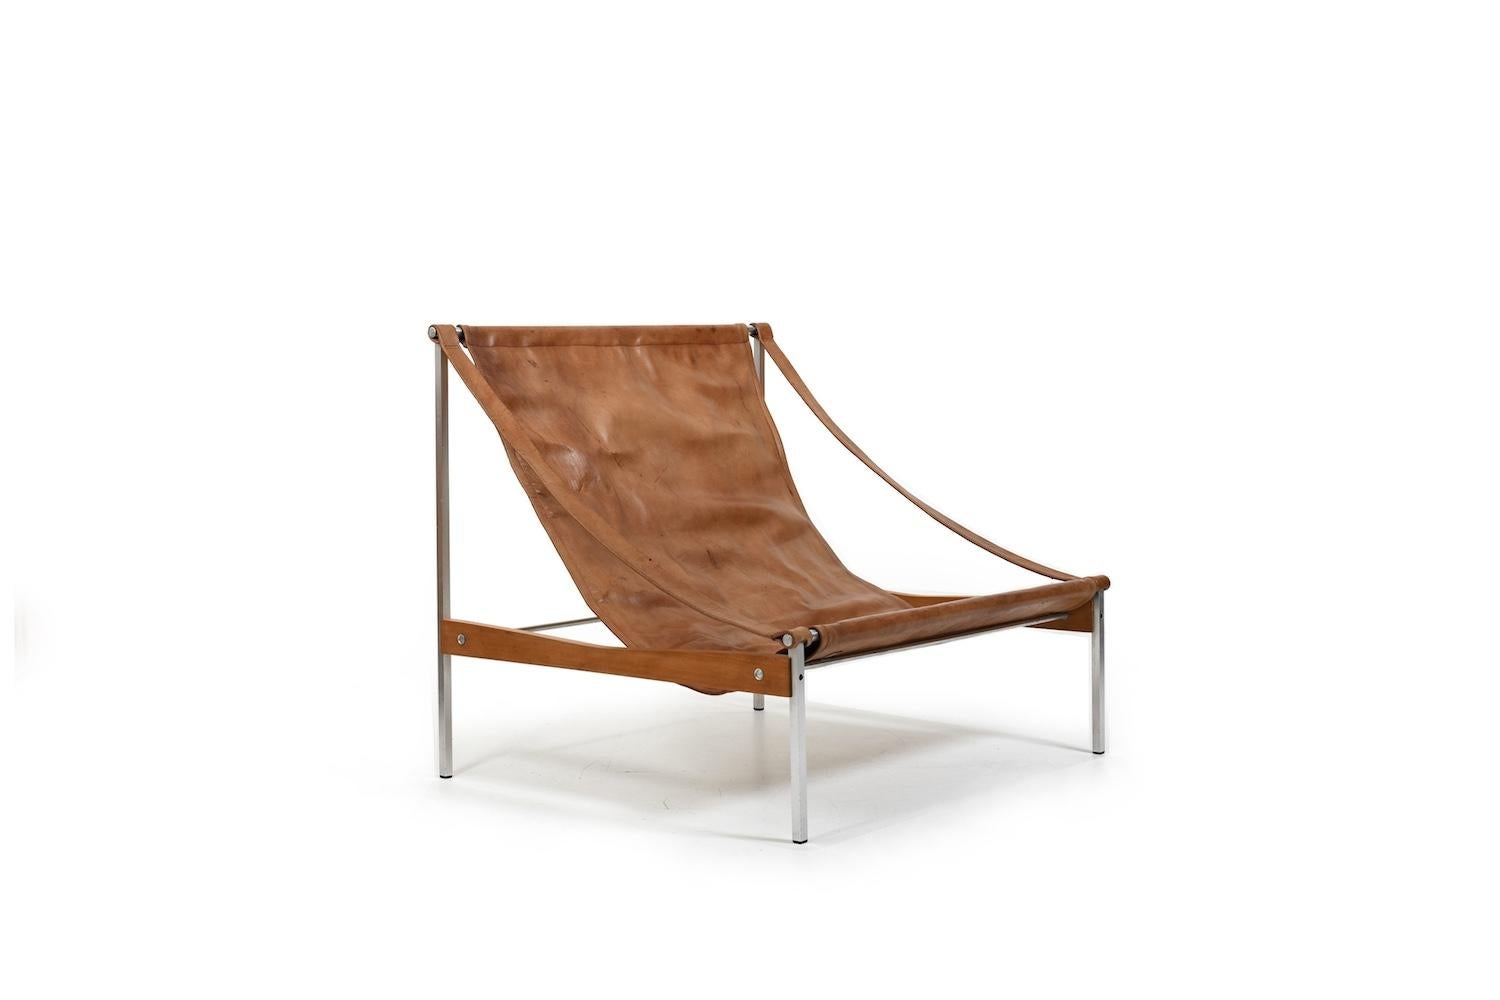 Rare grand leather and steel chair „Bequem“ by Stig Poulssen, Denmark 1970s. Patinated brown leather and pine wood. Very nice vintage condition. We can send it dismanteled, so its cheaper to ship with DHL